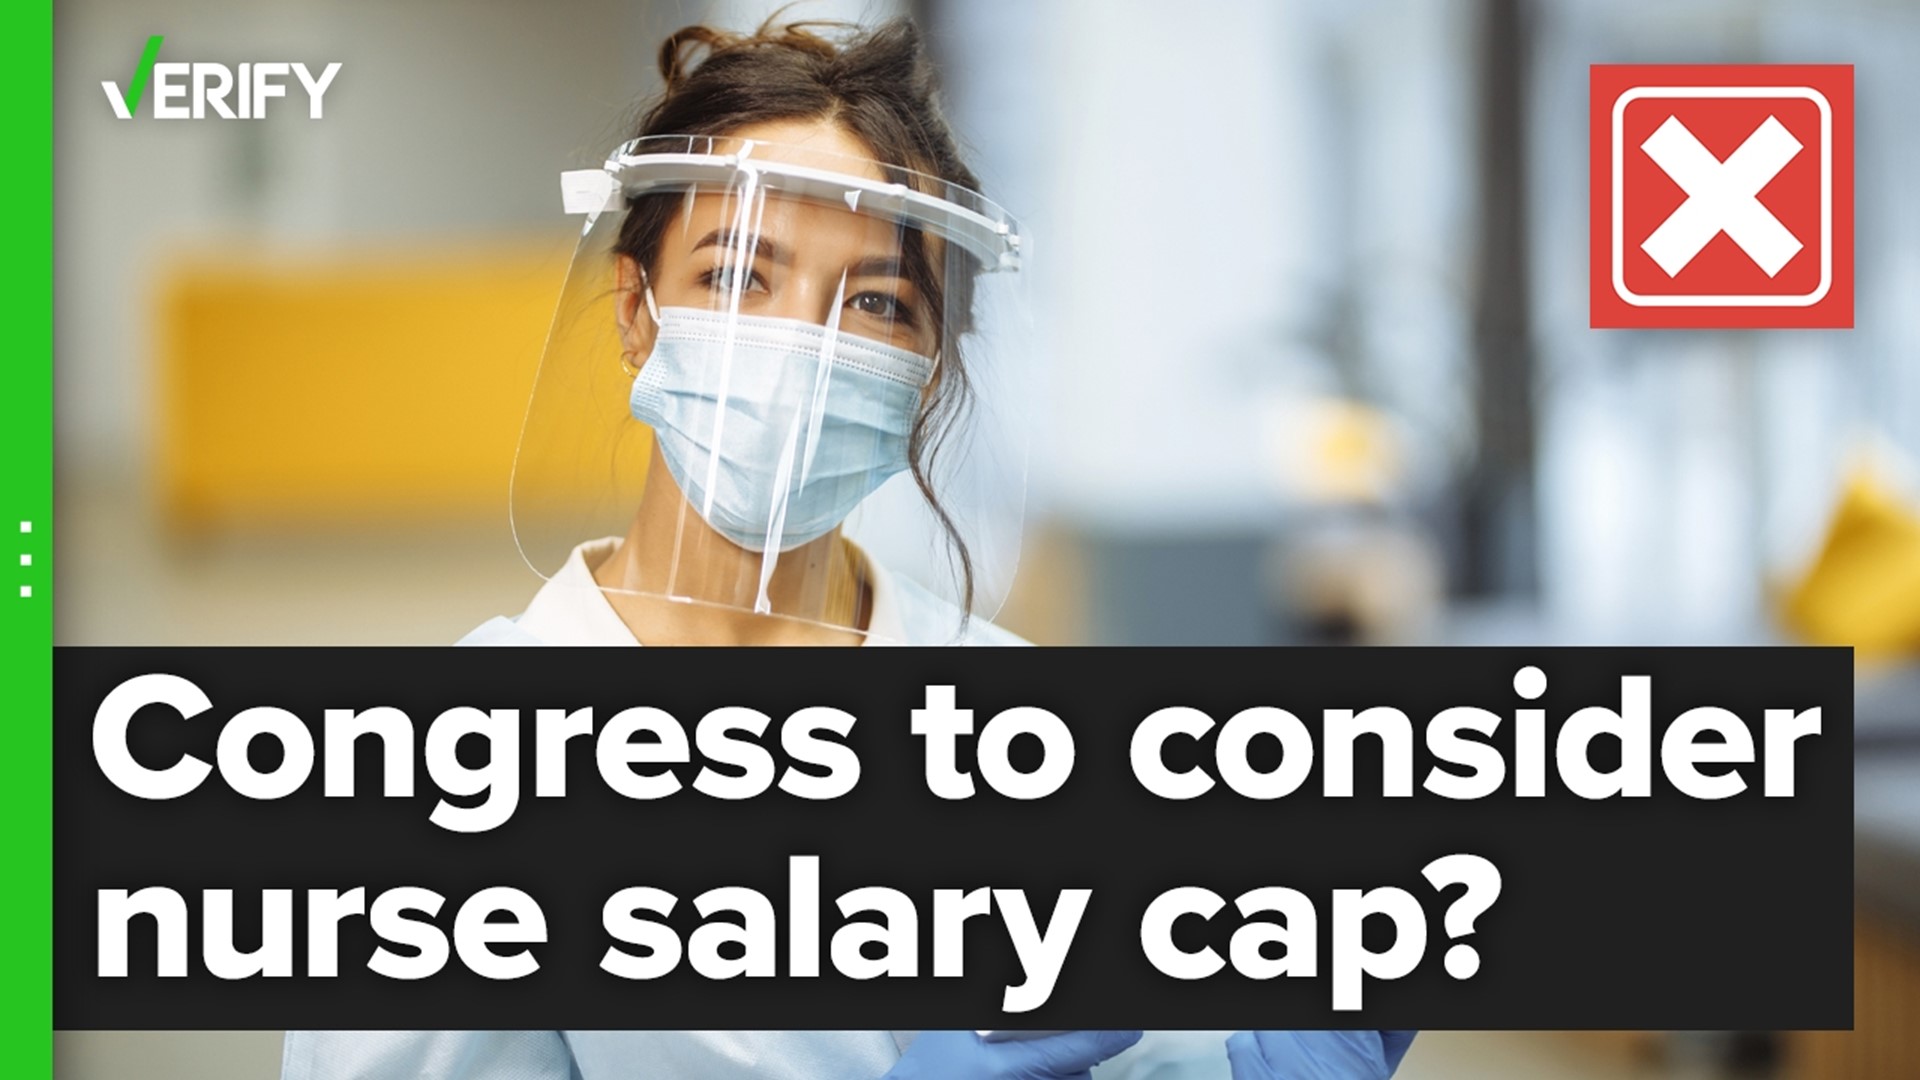 Multiple viral posts claim the federal government is exploring a “nurse salary cap.” That’s false.